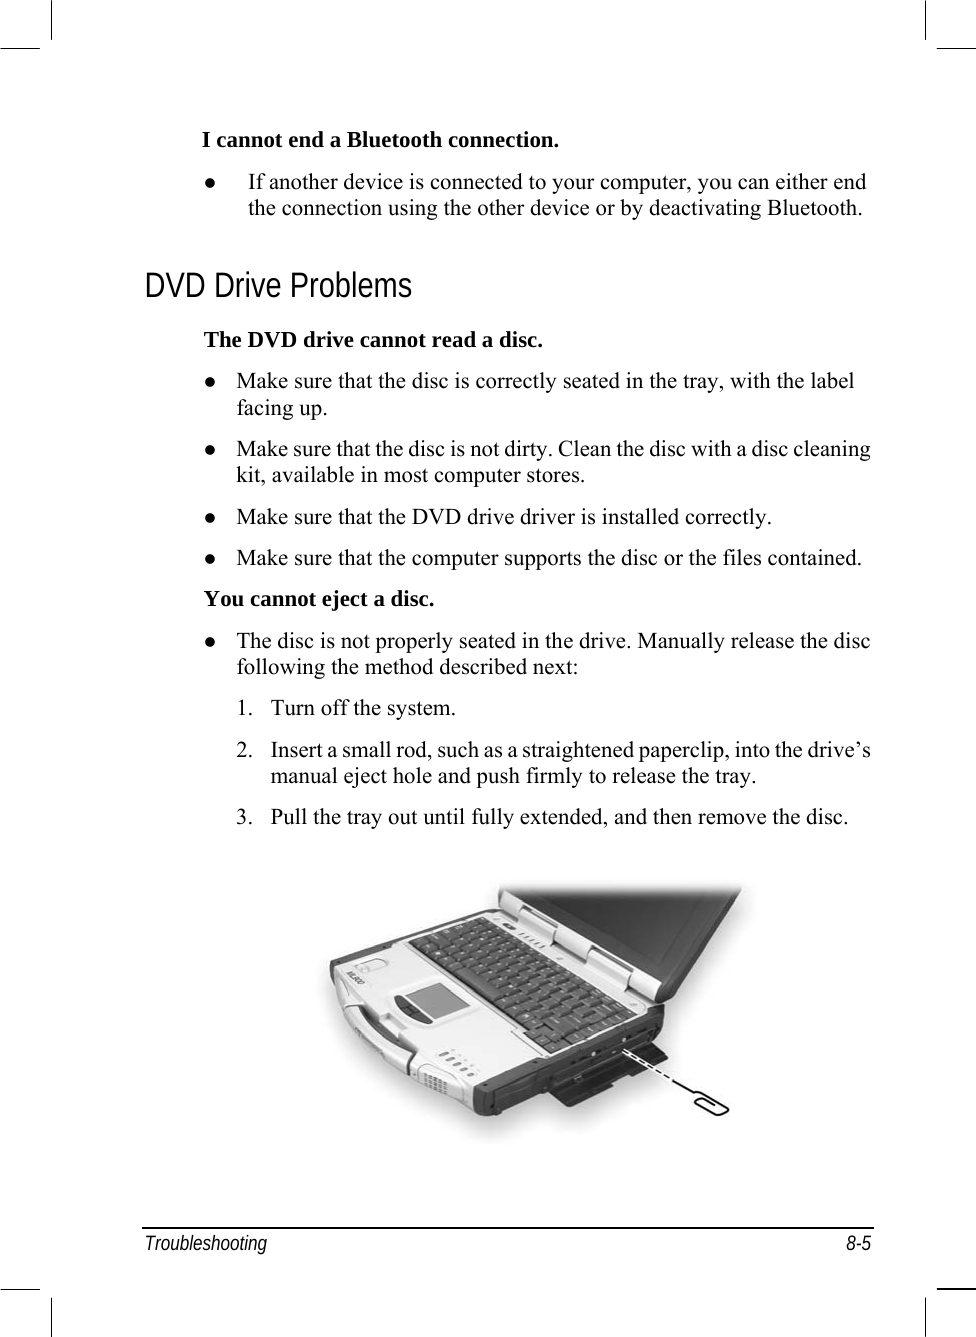  Troubleshooting 8-5 I cannot end a Bluetooth connection.   If another device is connected to your computer, you can either end the connection using the other device or by deactivating Bluetooth. DVD Drive Problems The DVD drive cannot read a disc.   Make sure that the disc is correctly seated in the tray, with the label facing up.   Make sure that the disc is not dirty. Clean the disc with a disc cleaning kit, available in most computer stores.   Make sure that the DVD drive driver is installed correctly.   Make sure that the computer supports the disc or the files contained. You cannot eject a disc.   The disc is not properly seated in the drive. Manually release the disc following the method described next: 1.  Turn off the system. 2.  Insert a small rod, such as a straightened paperclip, into the drive’s manual eject hole and push firmly to release the tray. 3.  Pull the tray out until fully extended, and then remove the disc.  